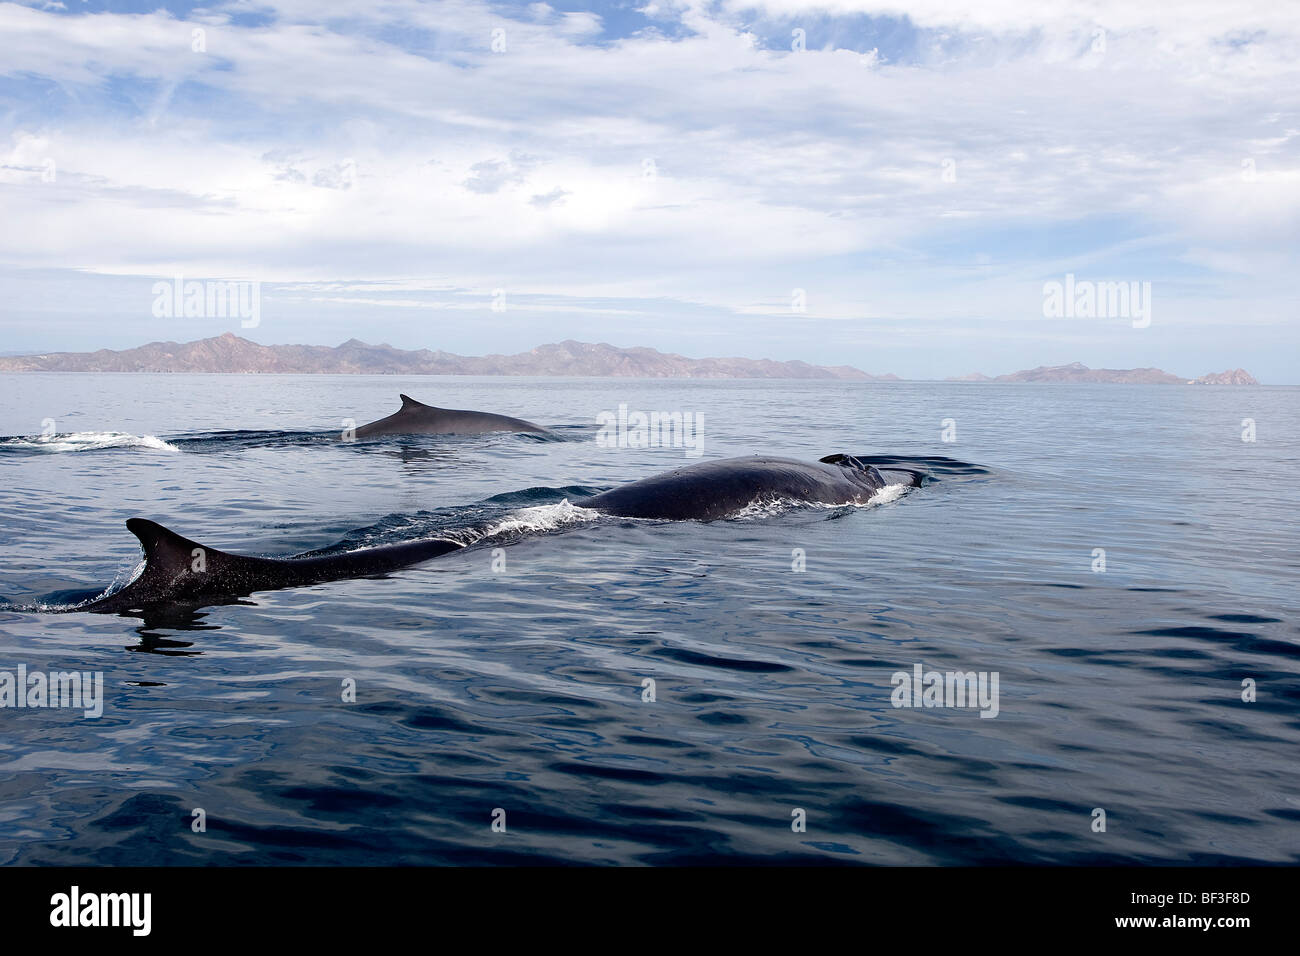 Fin Whales, Finback Whales, Common Rorquals (Balaenoptera physalus) swimming at surface. Stock Photo